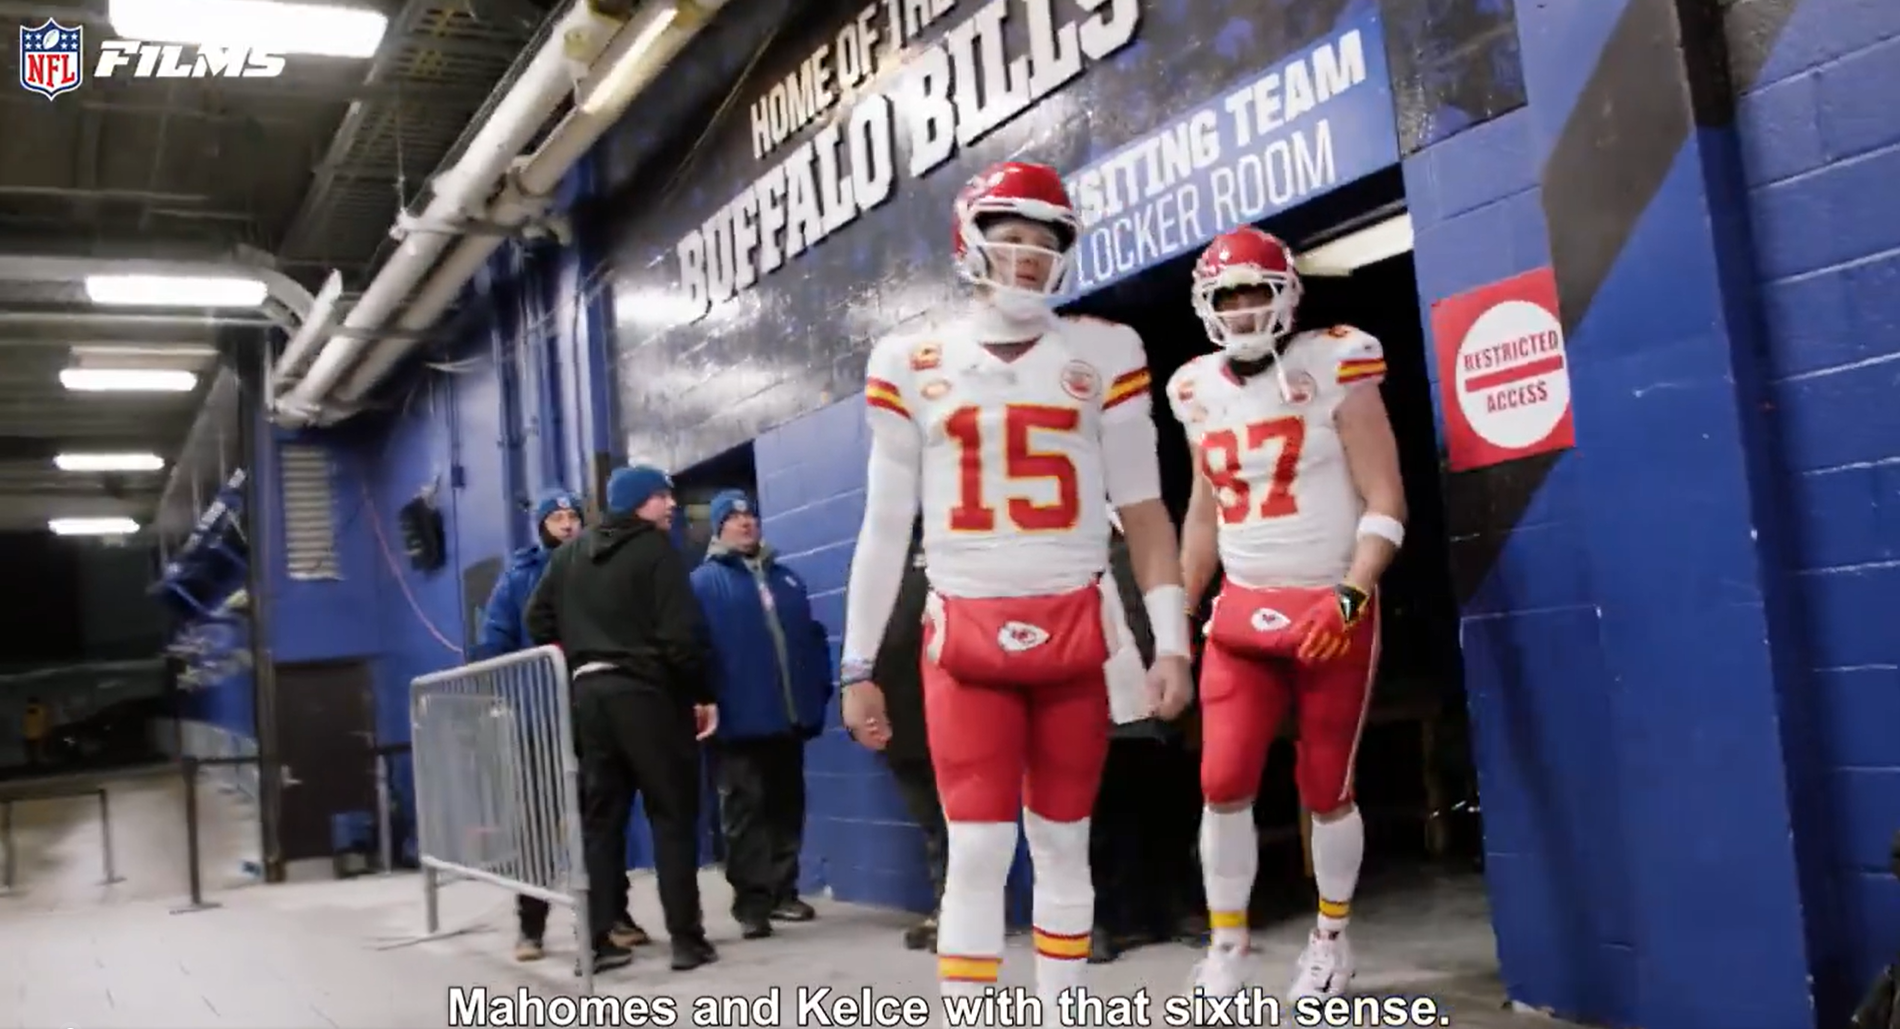 Mahomes and Kelce meant business coming up against the Bills this past playoffs